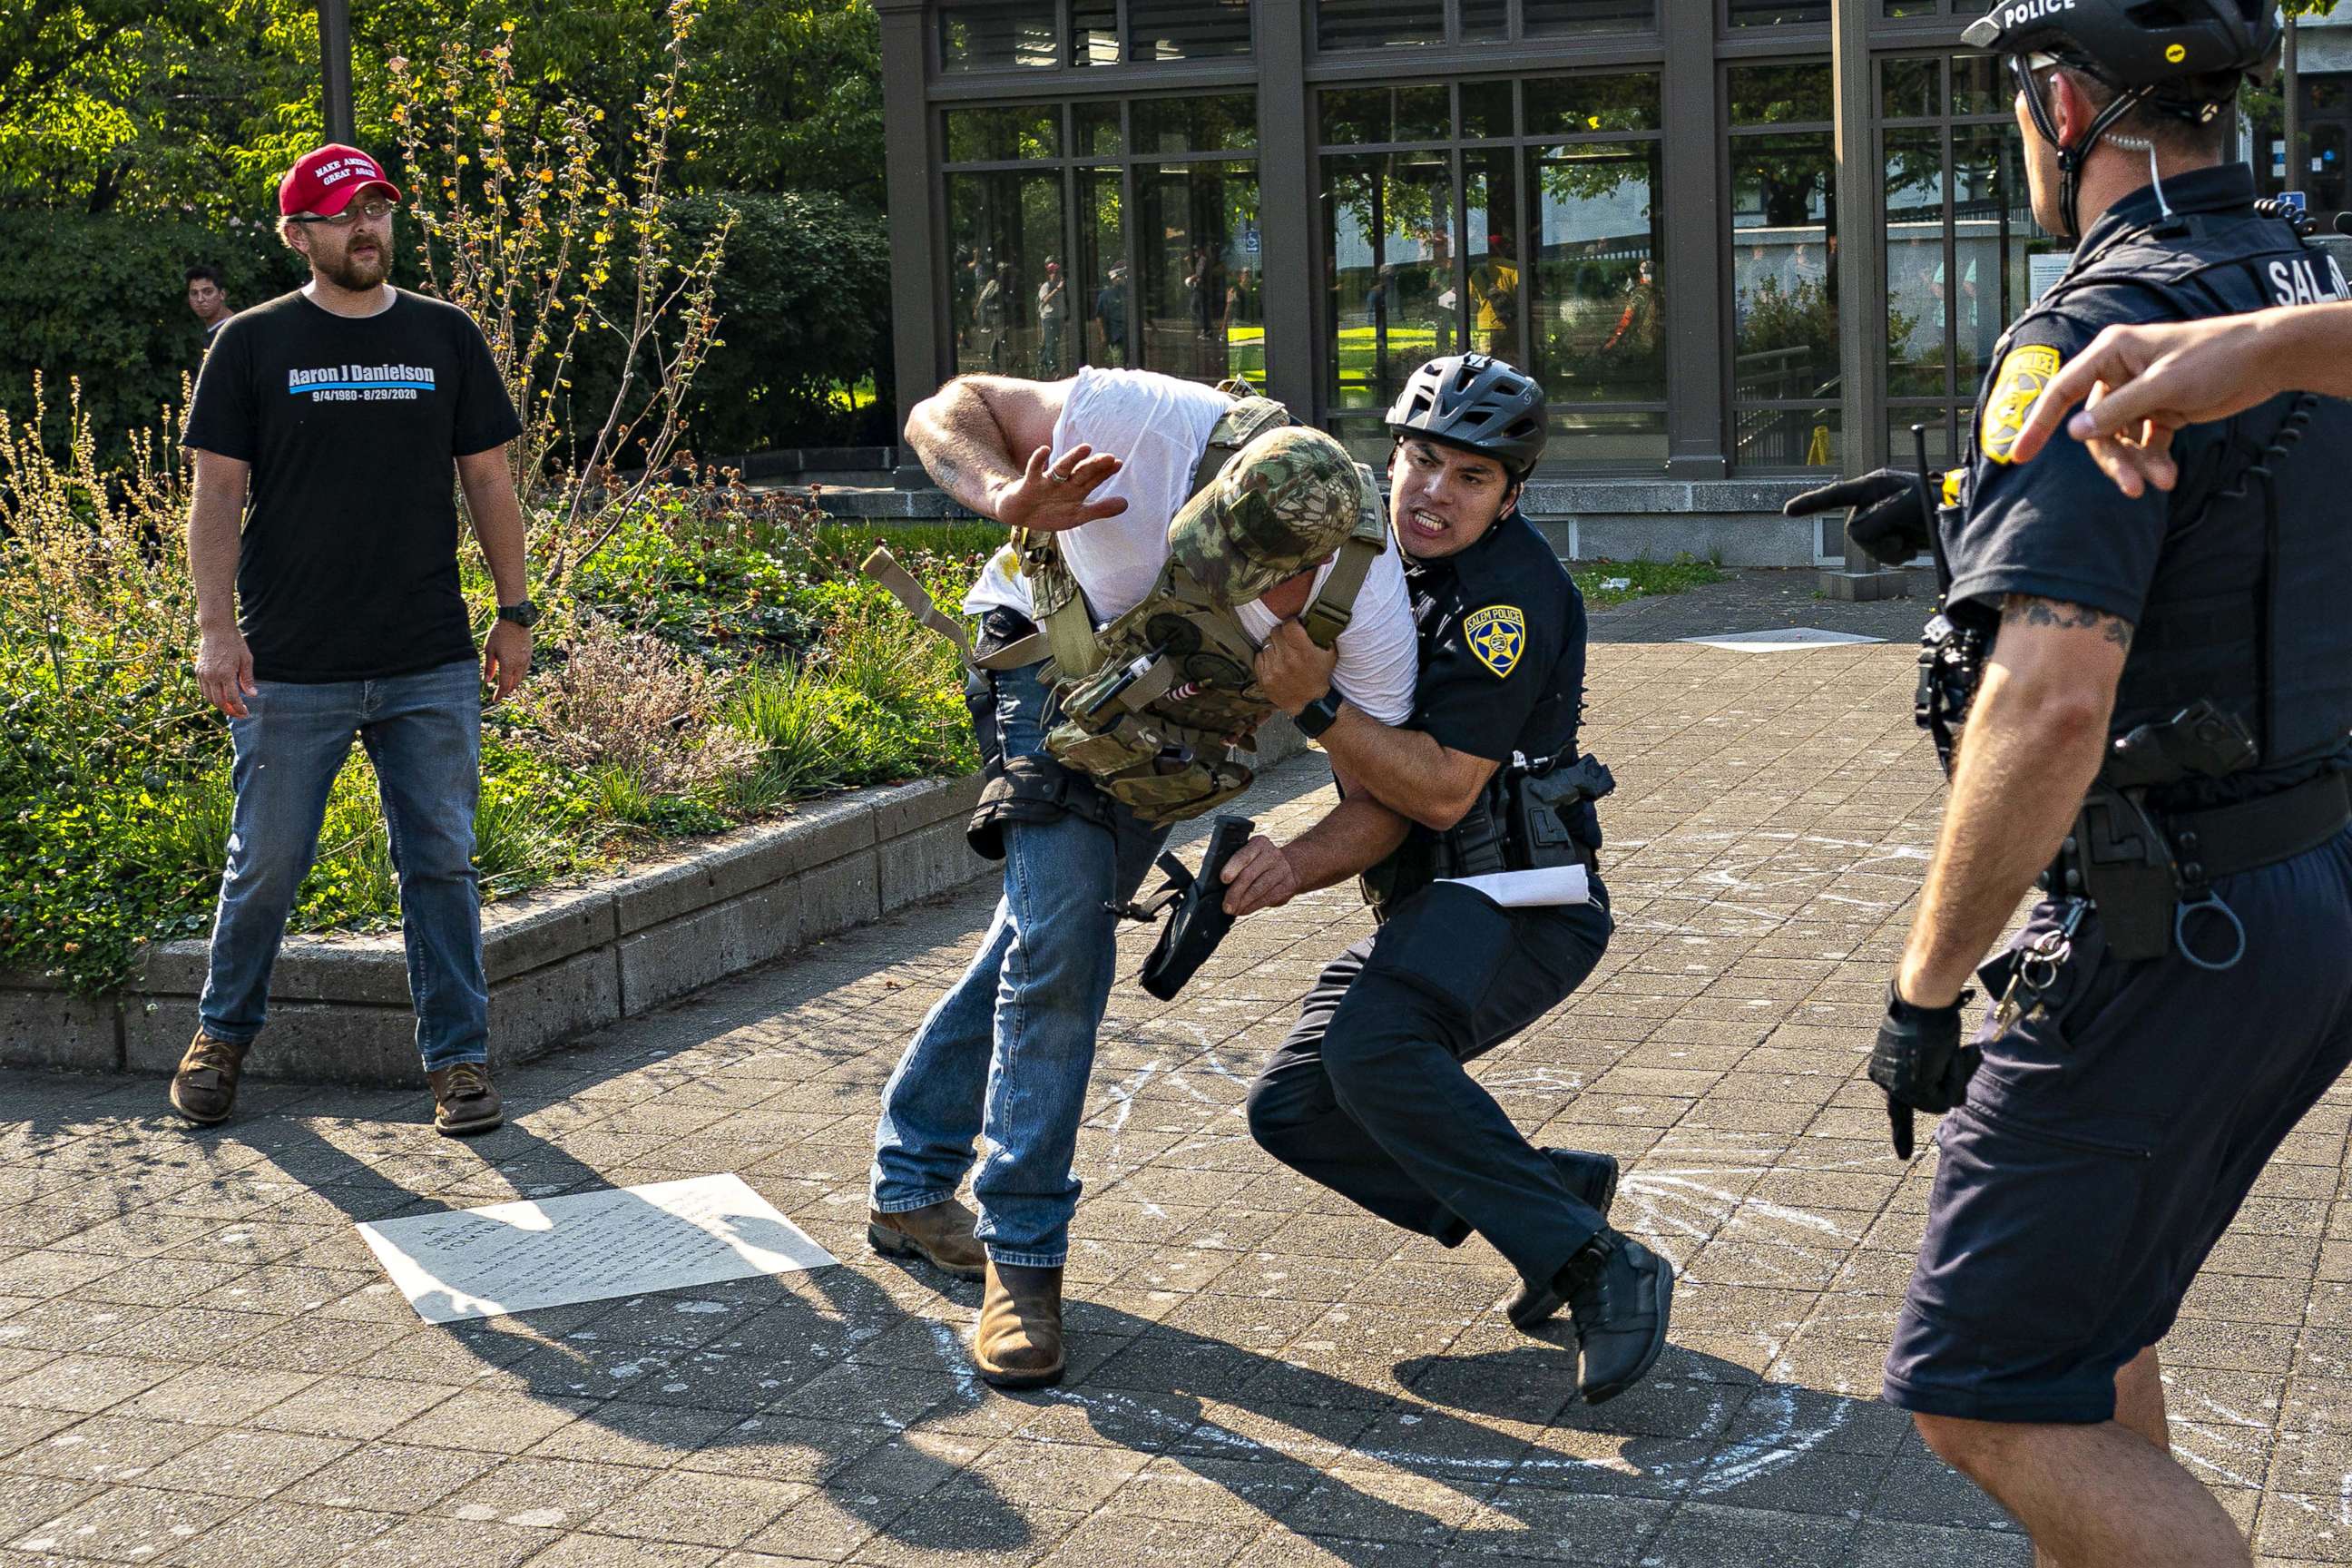 PHOTO: Police detain a right wing demonstrator following clashes with left wing demonstrators after a pro-Trump caravan rally convened at the Oregon State Capitol building on Sept. 7, 2020, in Salem, Oregon.